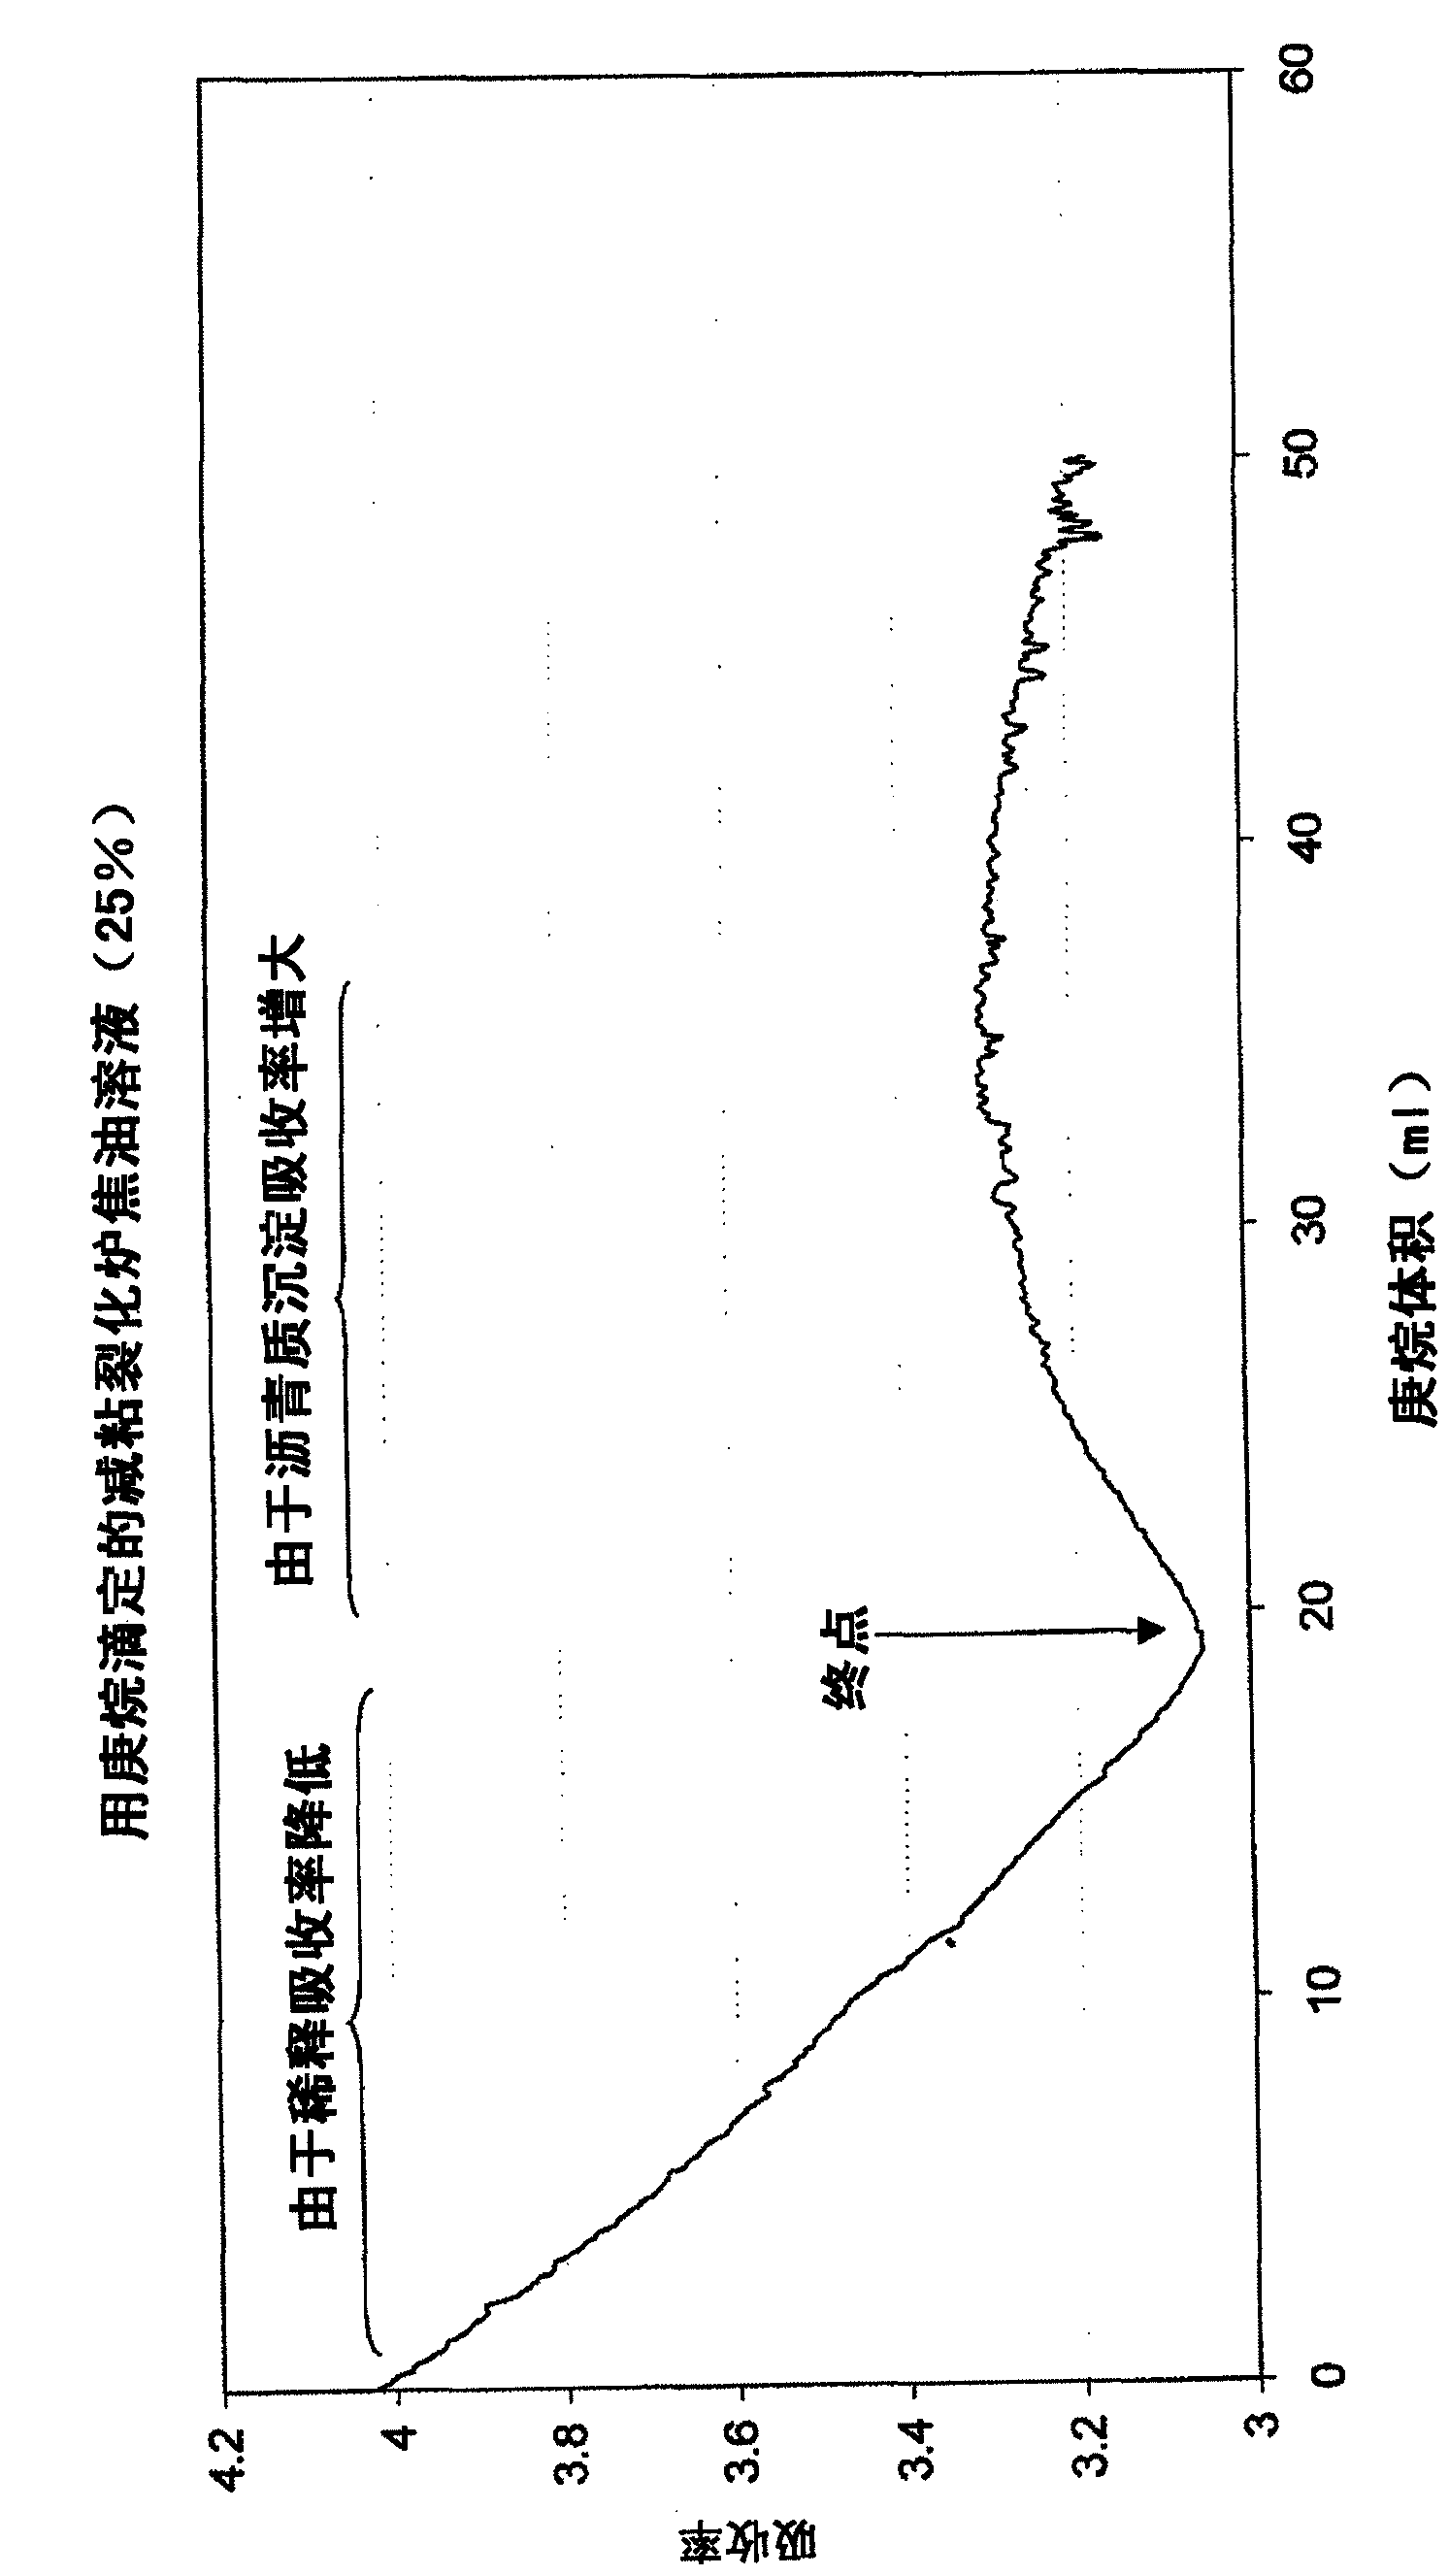 Method for predicting hydrocarbon process stream stability using near infrared spectra